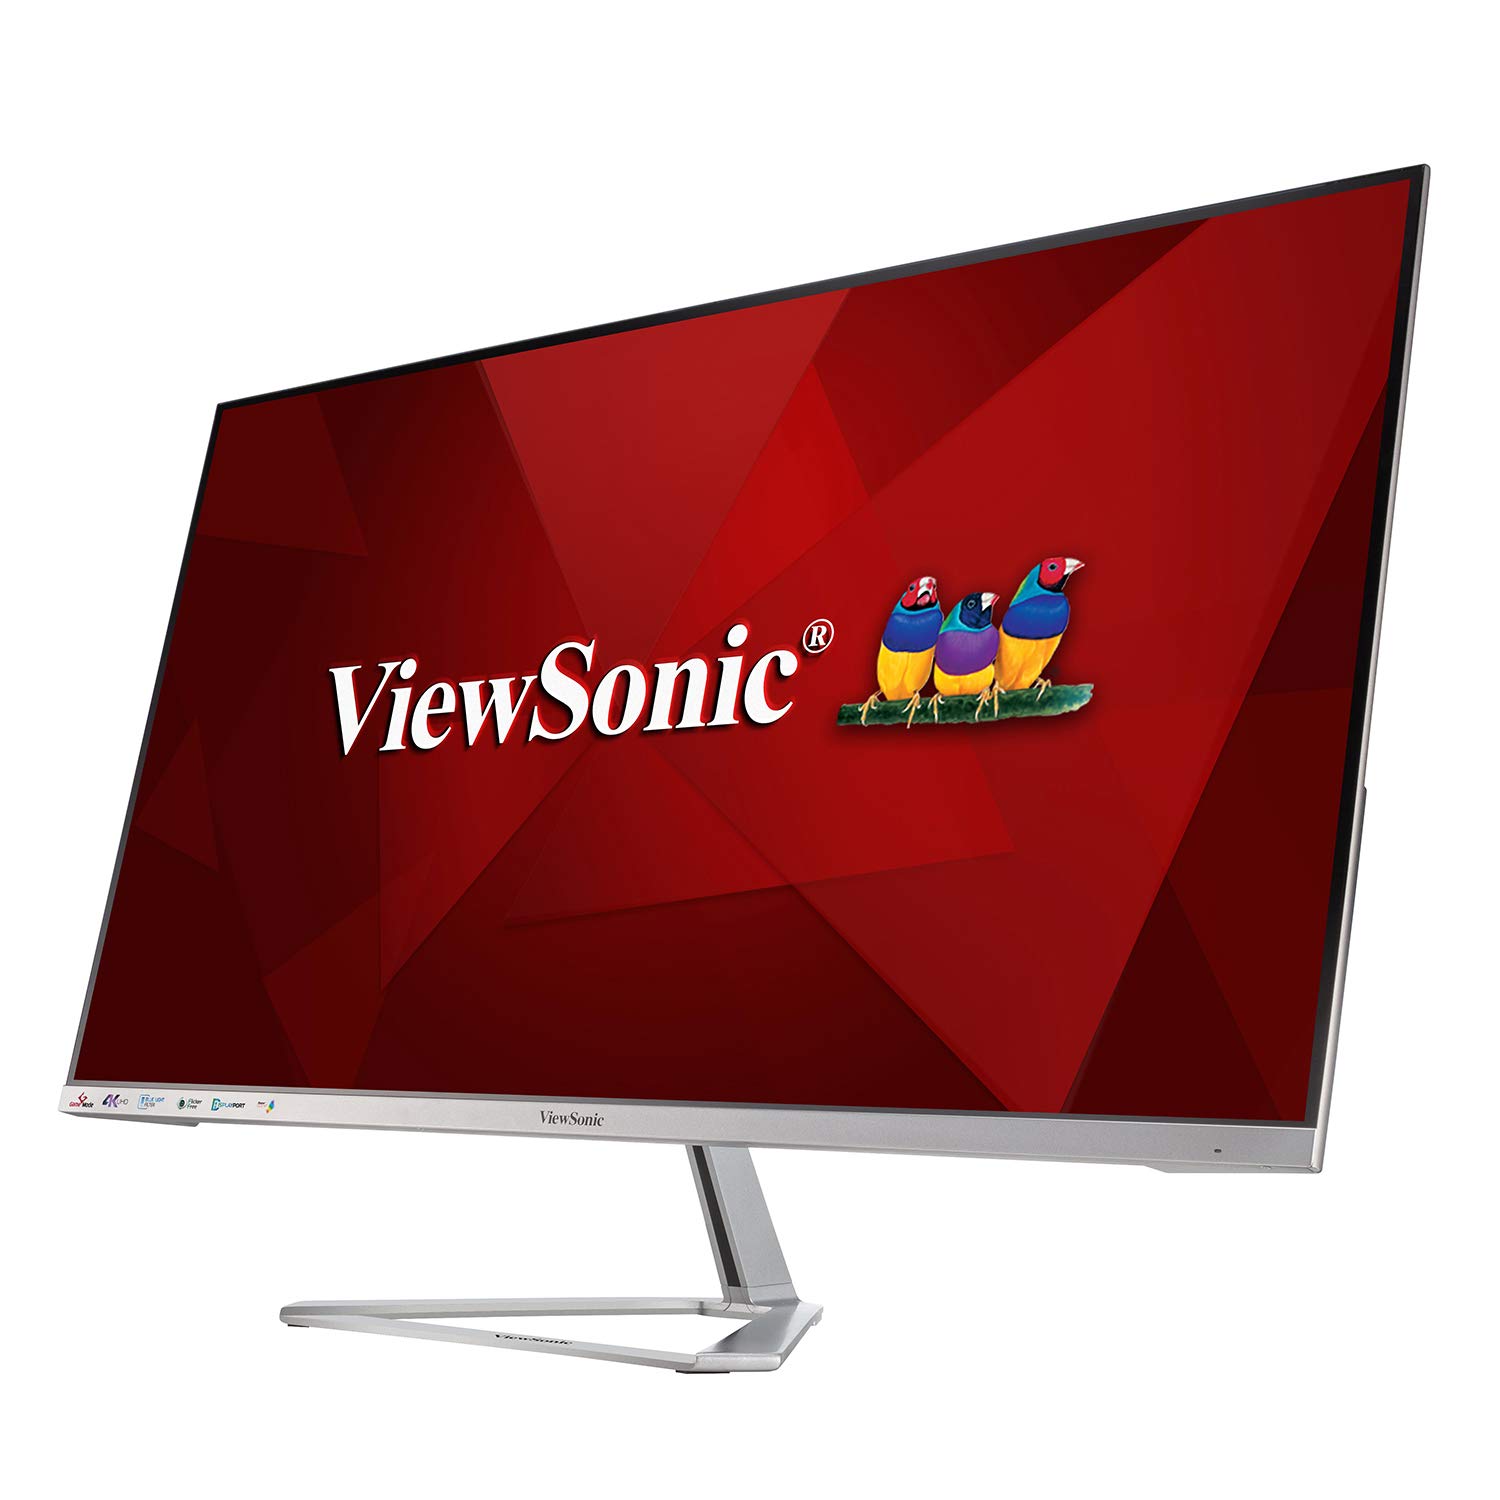 ViewSonic VX3276-4K-MHD 32 Inch 4K UHD Monitor with Ultra-Thin Bezels, HDR10 HDMI and DisplayPort for Home and Office,blue